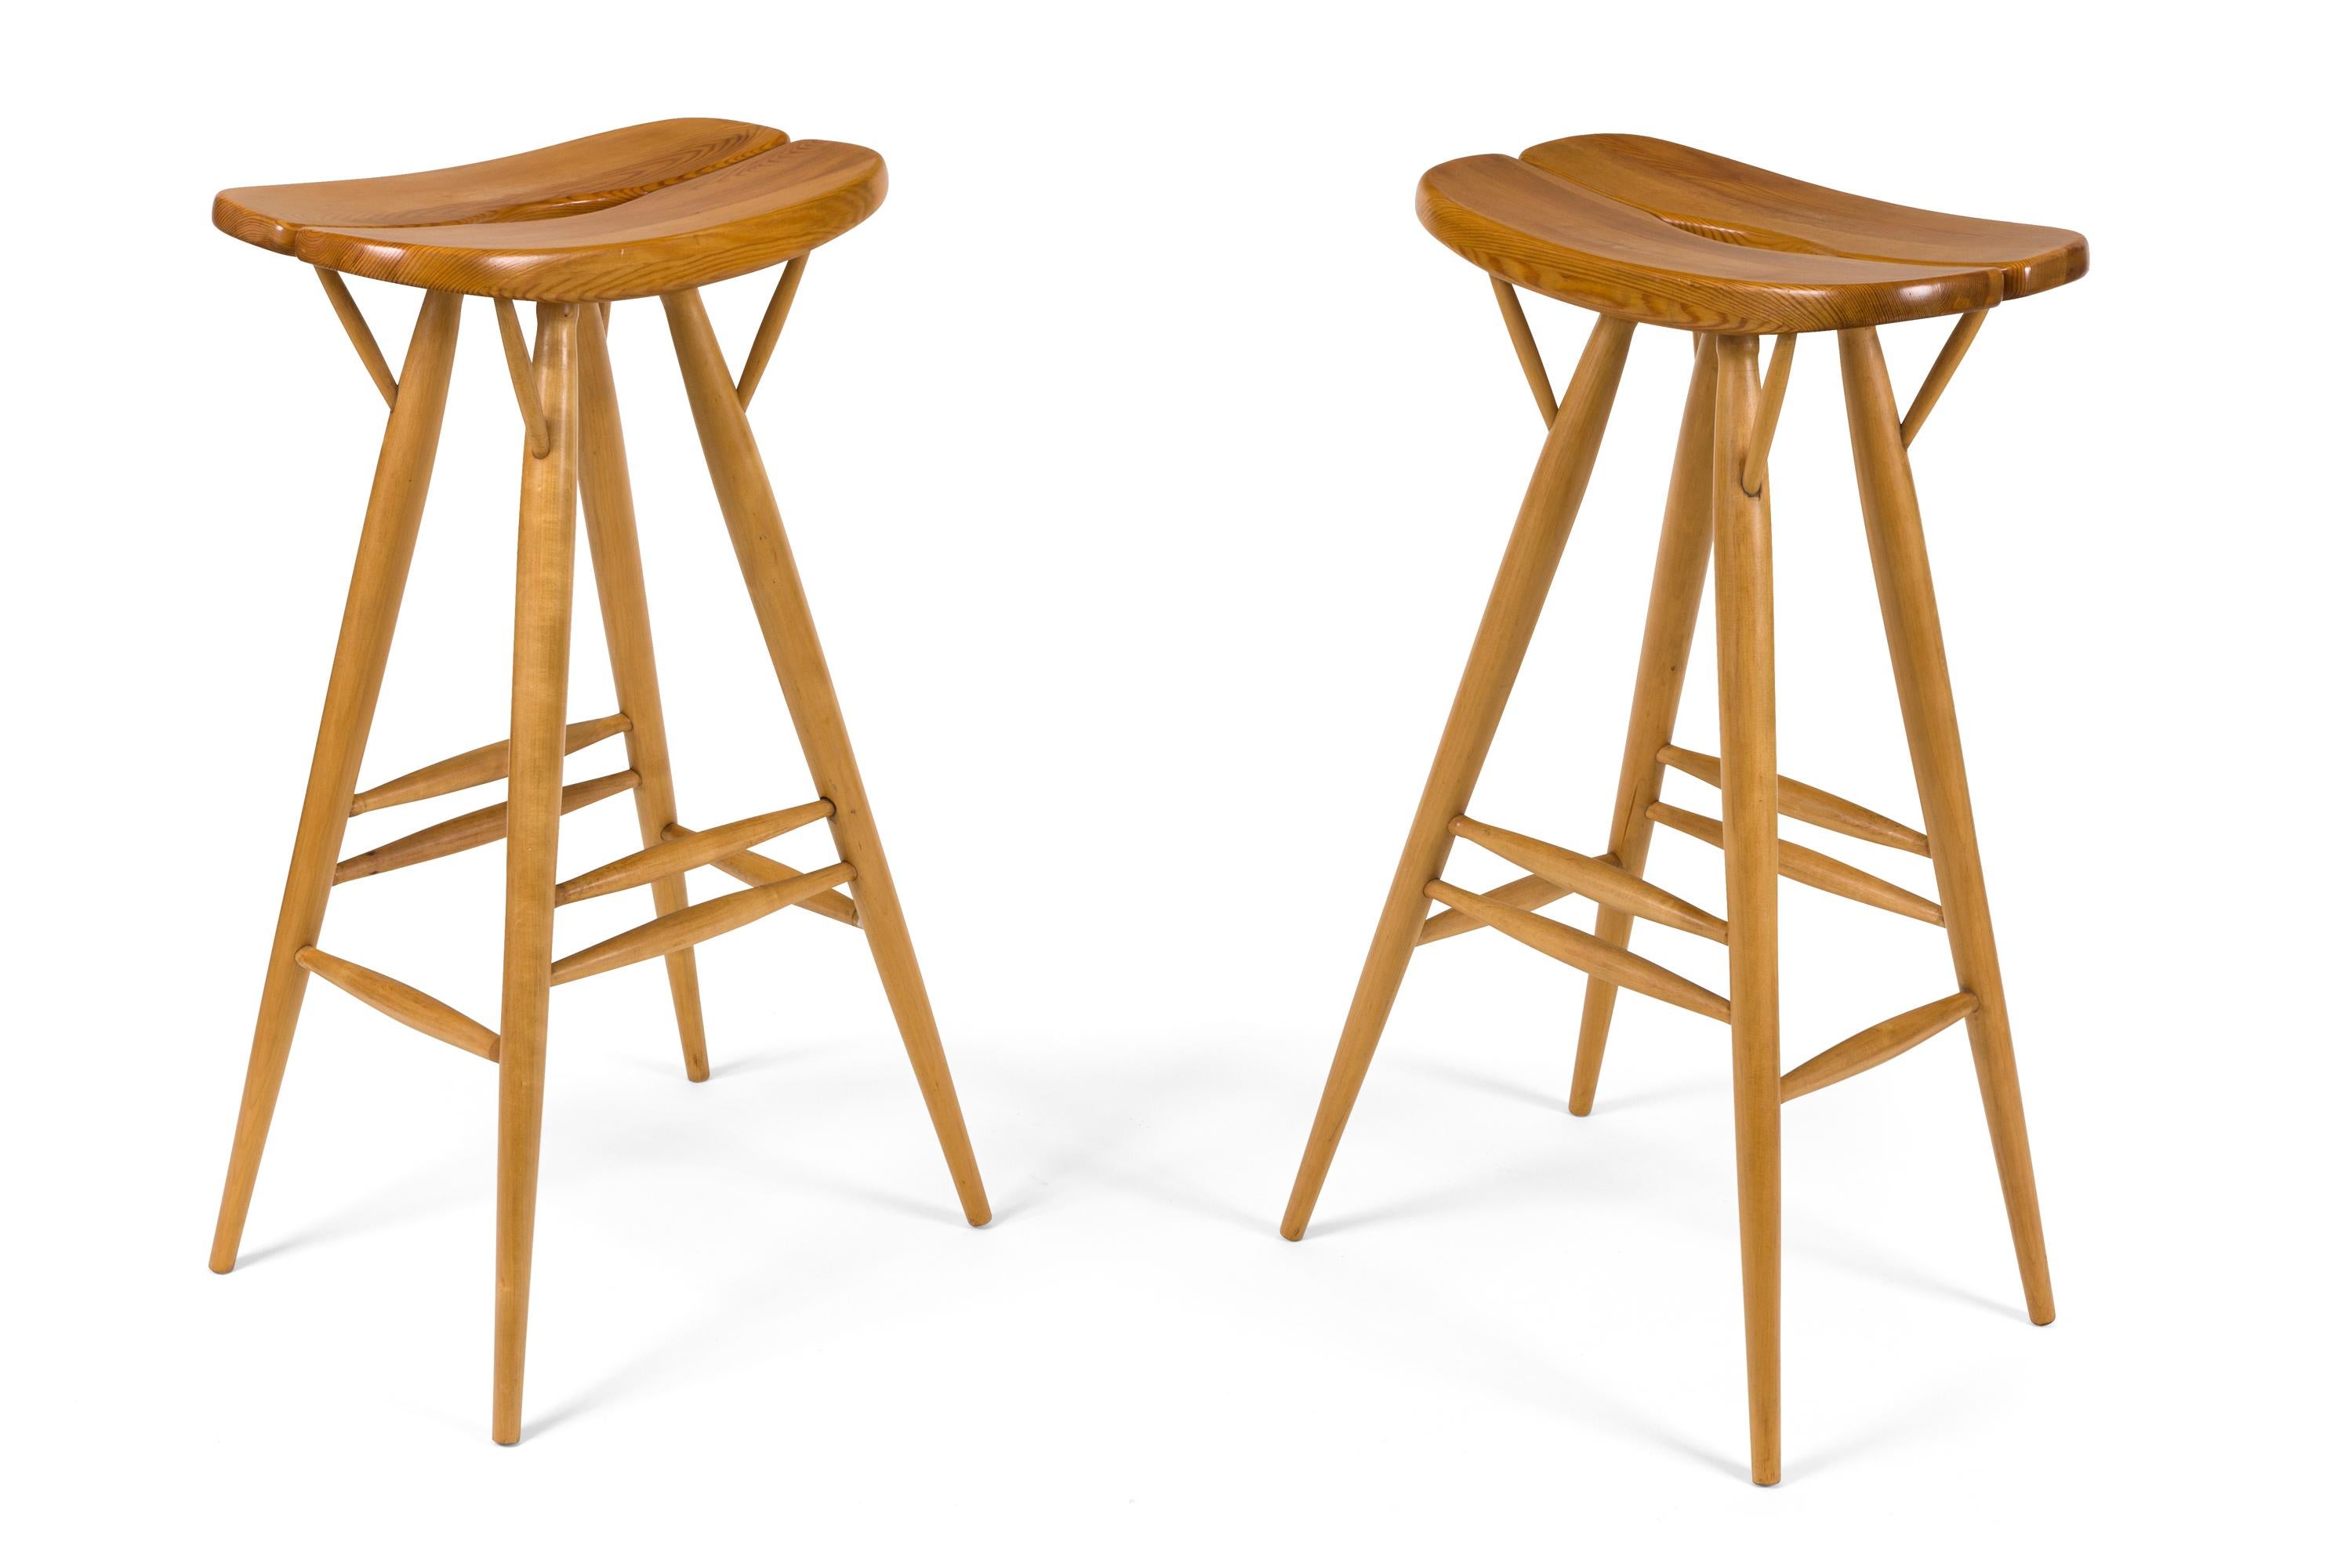 A set of rare early Pirkka barstools by Ilmari Tapiovaara. Over his lifetime Tapiovaara won a total of six gold medals at the Milan Triennale in addition to many other prestigious architecture and design awards.